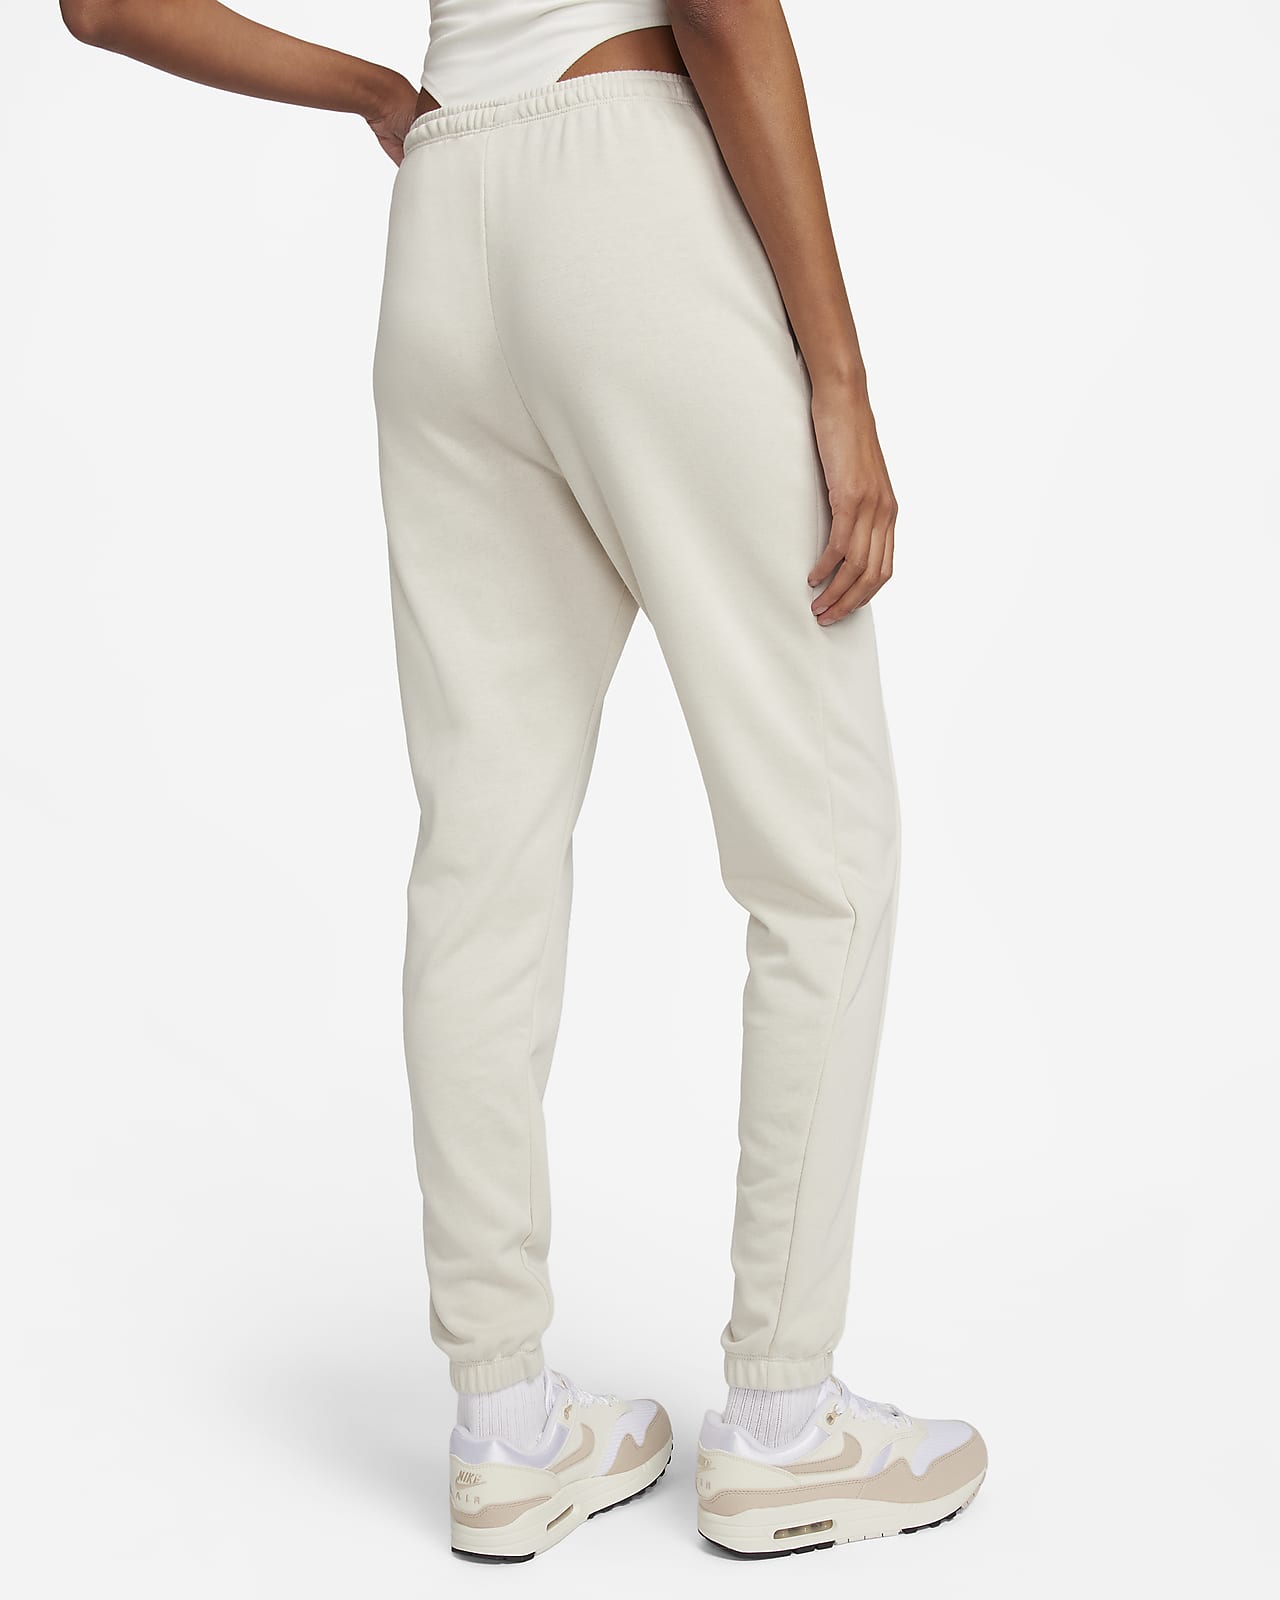 Nike Sportswear Chill Terry Women's Slim High-Waisted French Terry